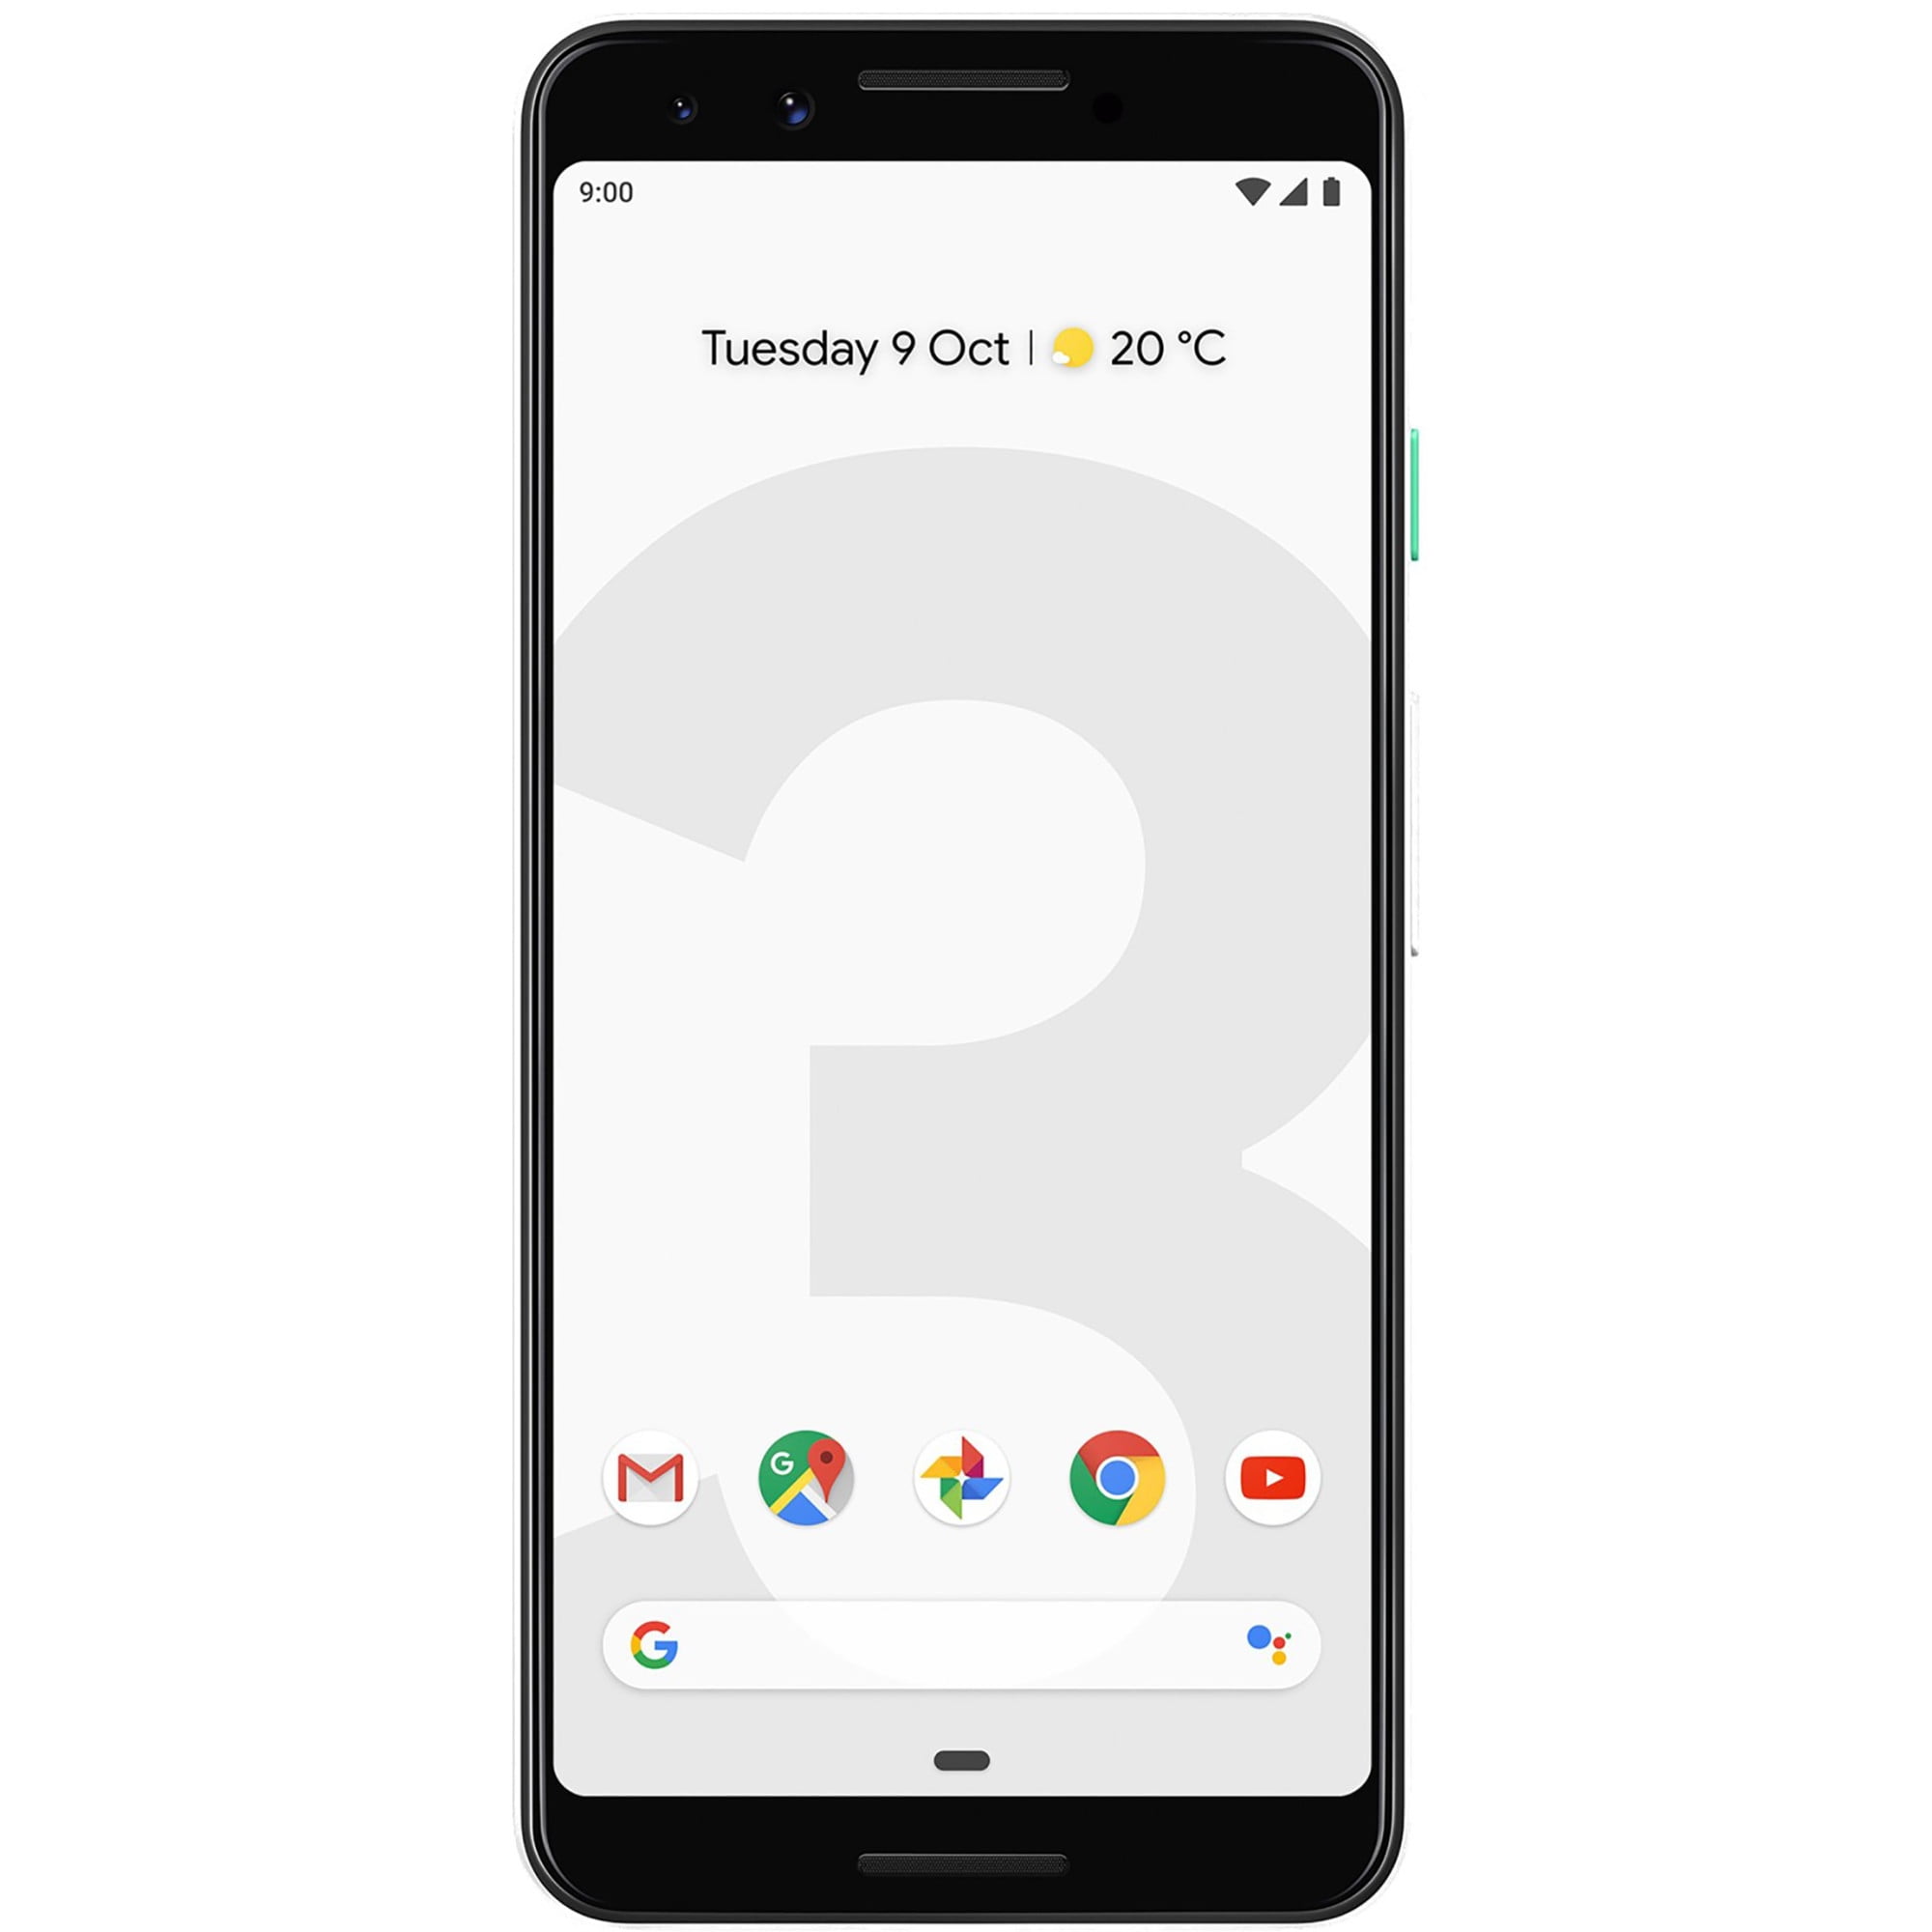 Google Pixel 3 64GB Unlocked GSM & CDMA 4G LTE Android Phone w/ 12.2MP Rear  & Dual 8MP Front Camera - Clearly White (Refurbished)